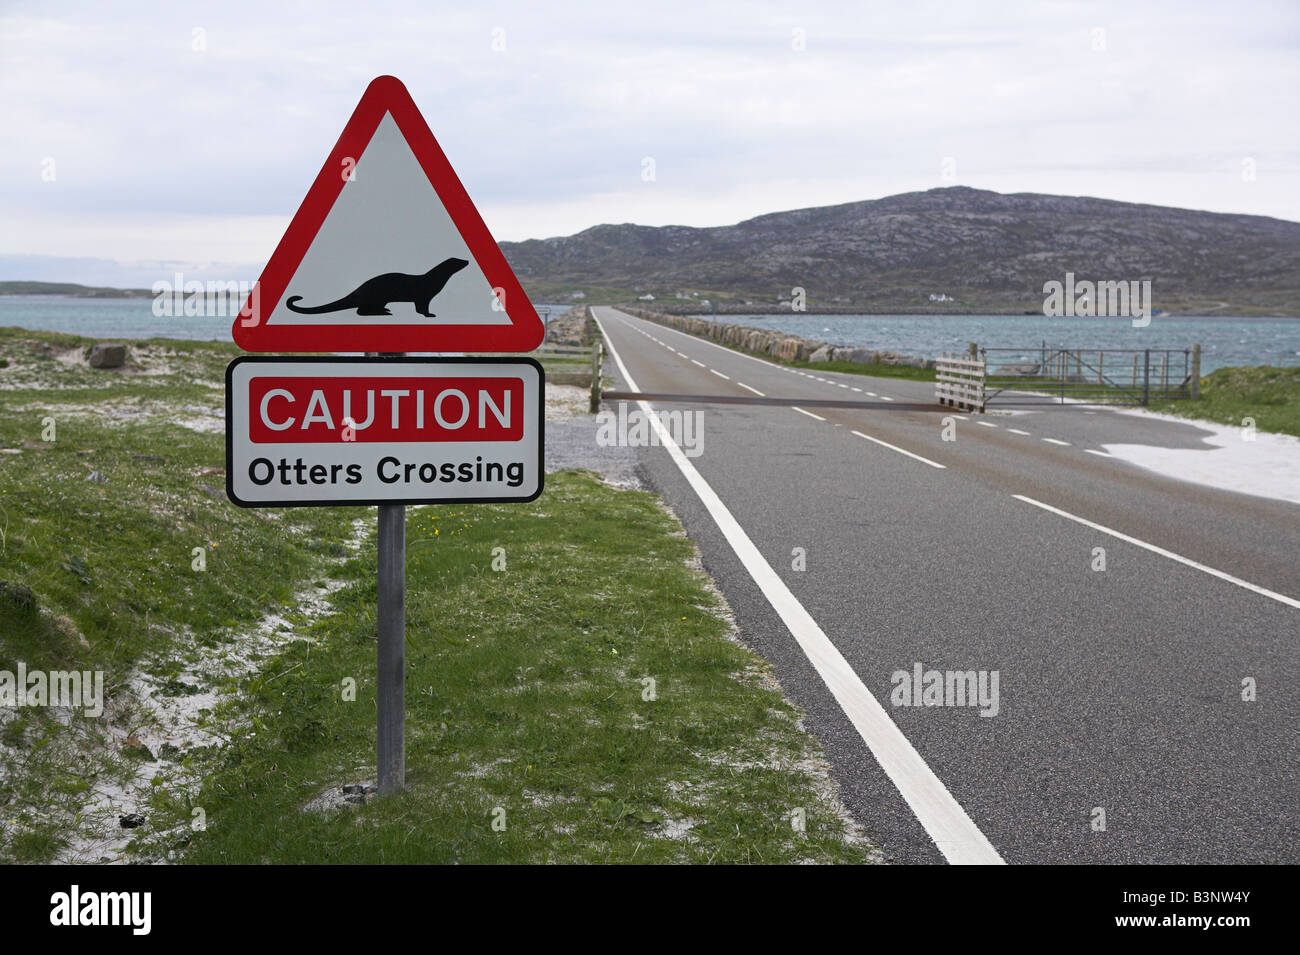 Caution Otters Crossing warning sign on causeway between South Uist and Eriskay, Scotland in May (taken from Eriskay side). Stock Photo